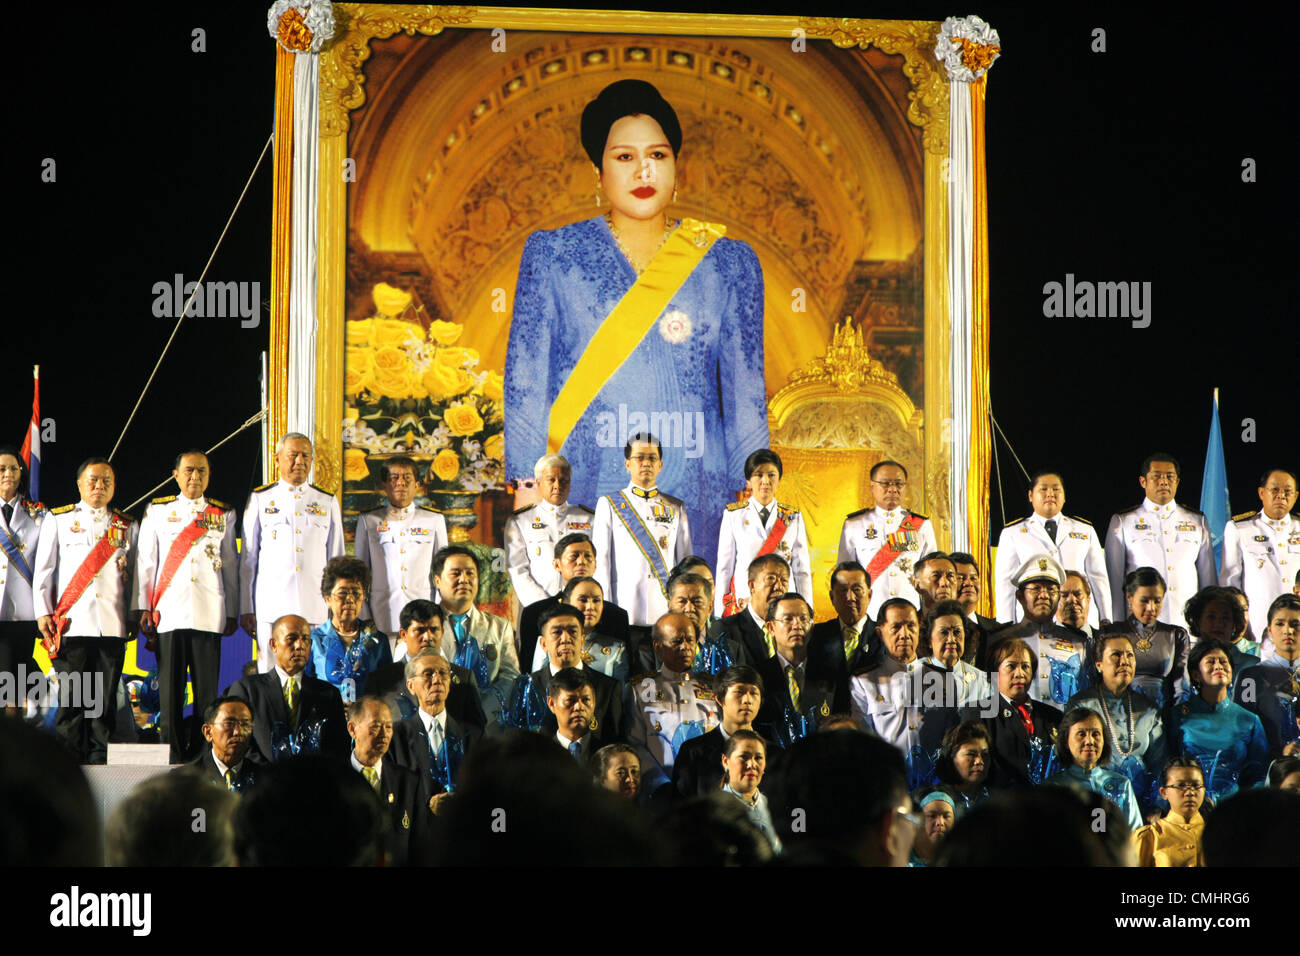 The Royal Field , Bangkok , Thailand , August 12 , 2012 . Thai Prime minister during a ceremony .Thais nationwide celebrate Her Majesty the Queen's 80th birthday with numerous celebrations and ceremonies. Stock Photo